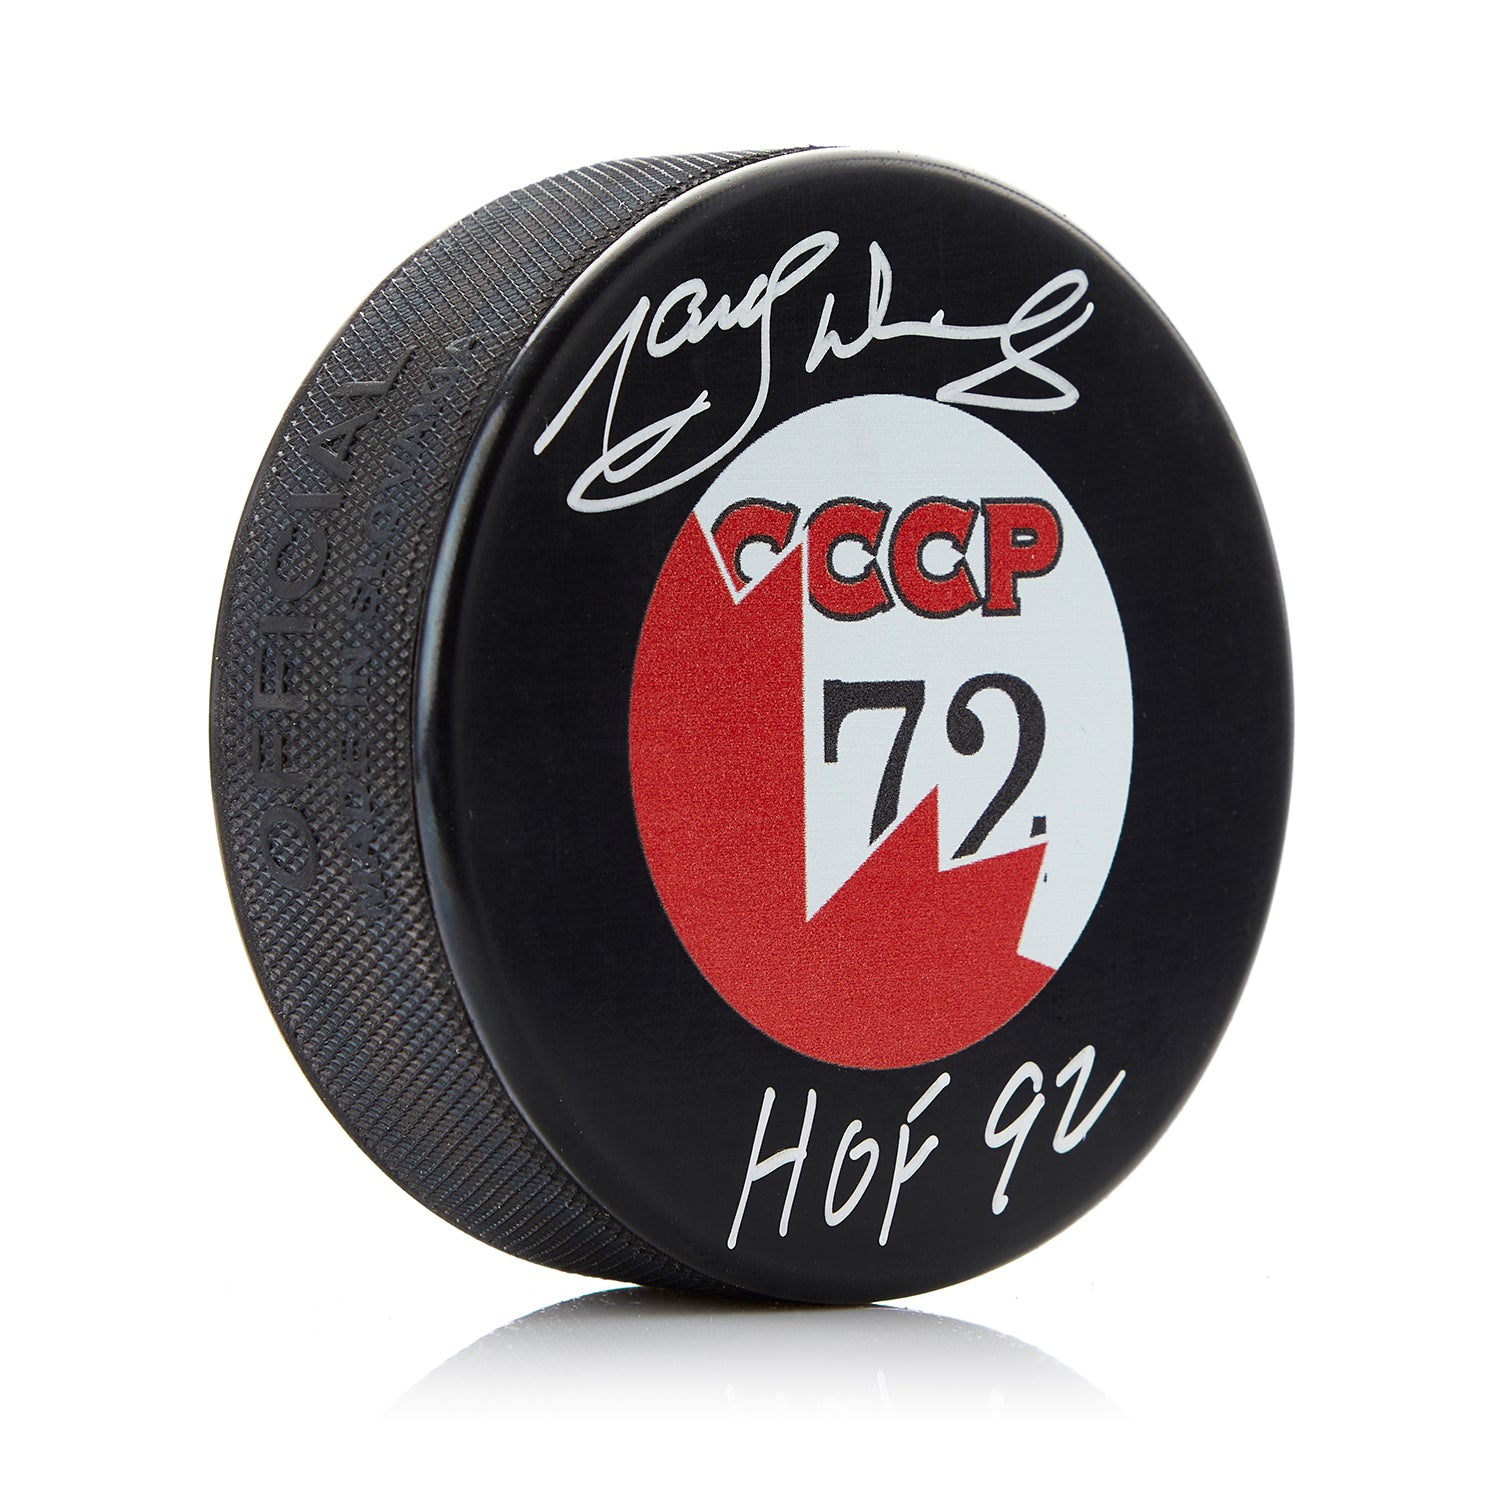 Marcel Dionne Signed 1972 Summit Series Canada CCCP Hockey Puck with HOF Note